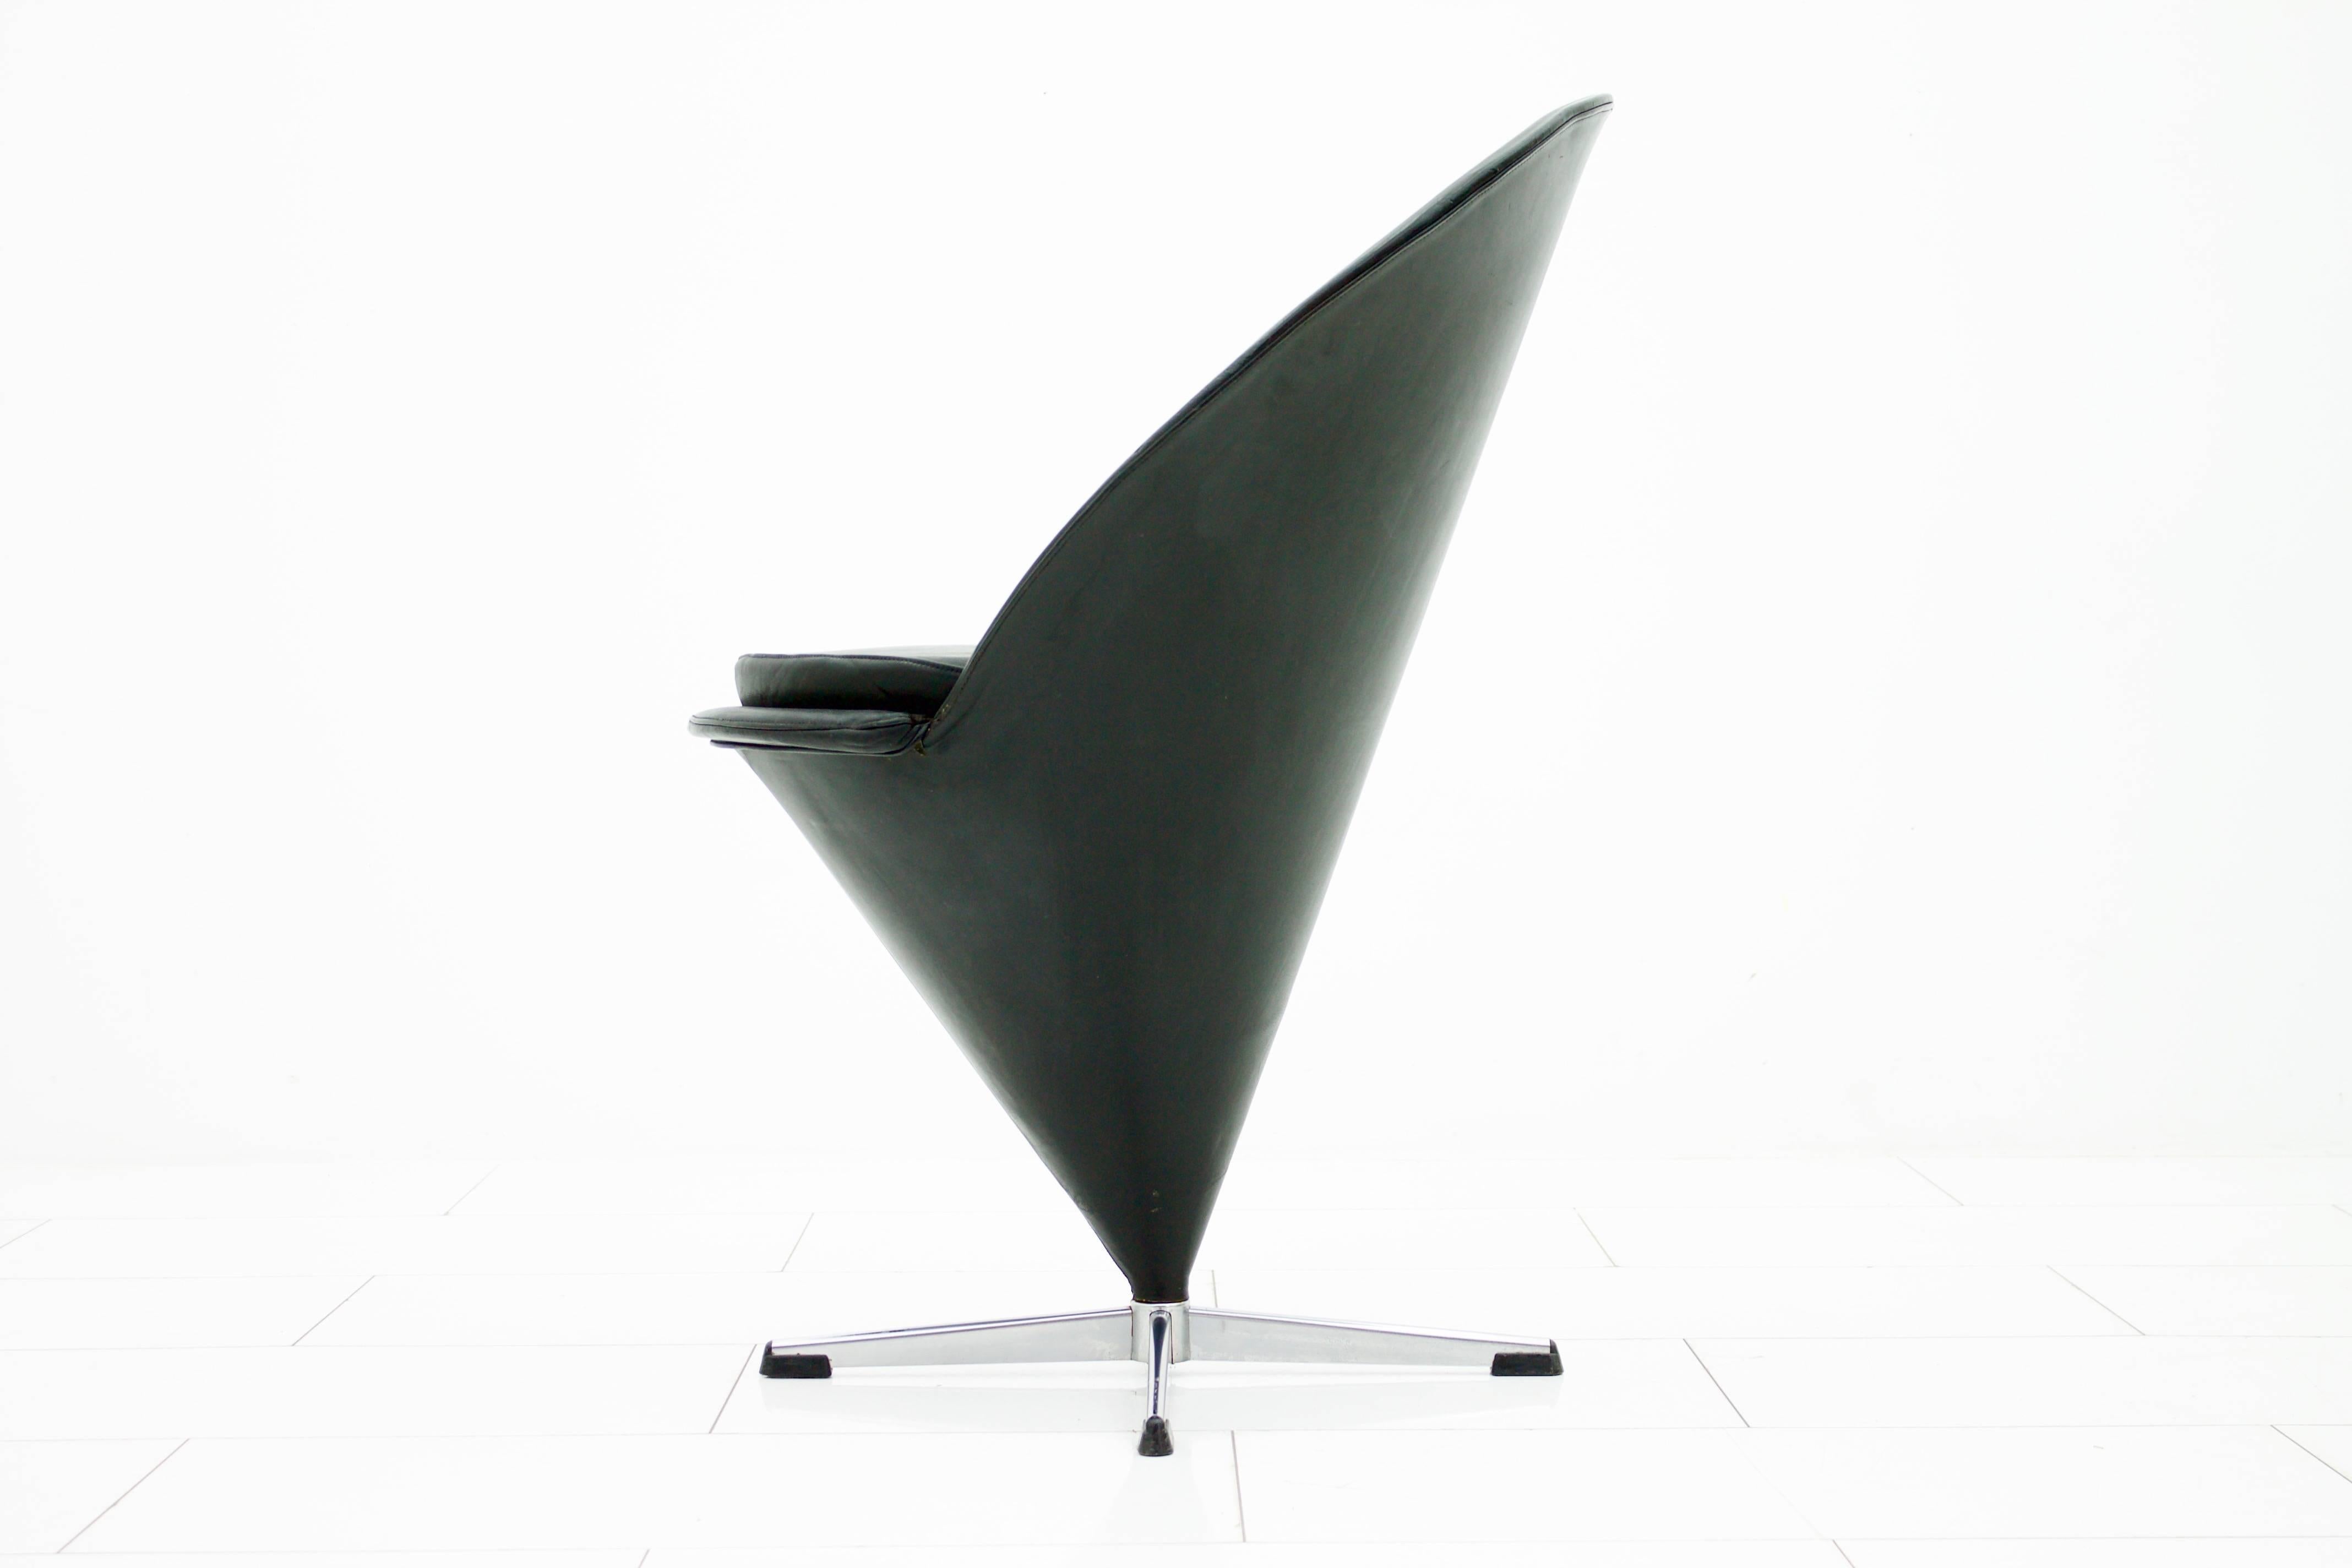 Original verner panton cone chair, original black leather, designed in 1958. 
Four chairs are available.

Very good original condition!

Worldwide shipping.